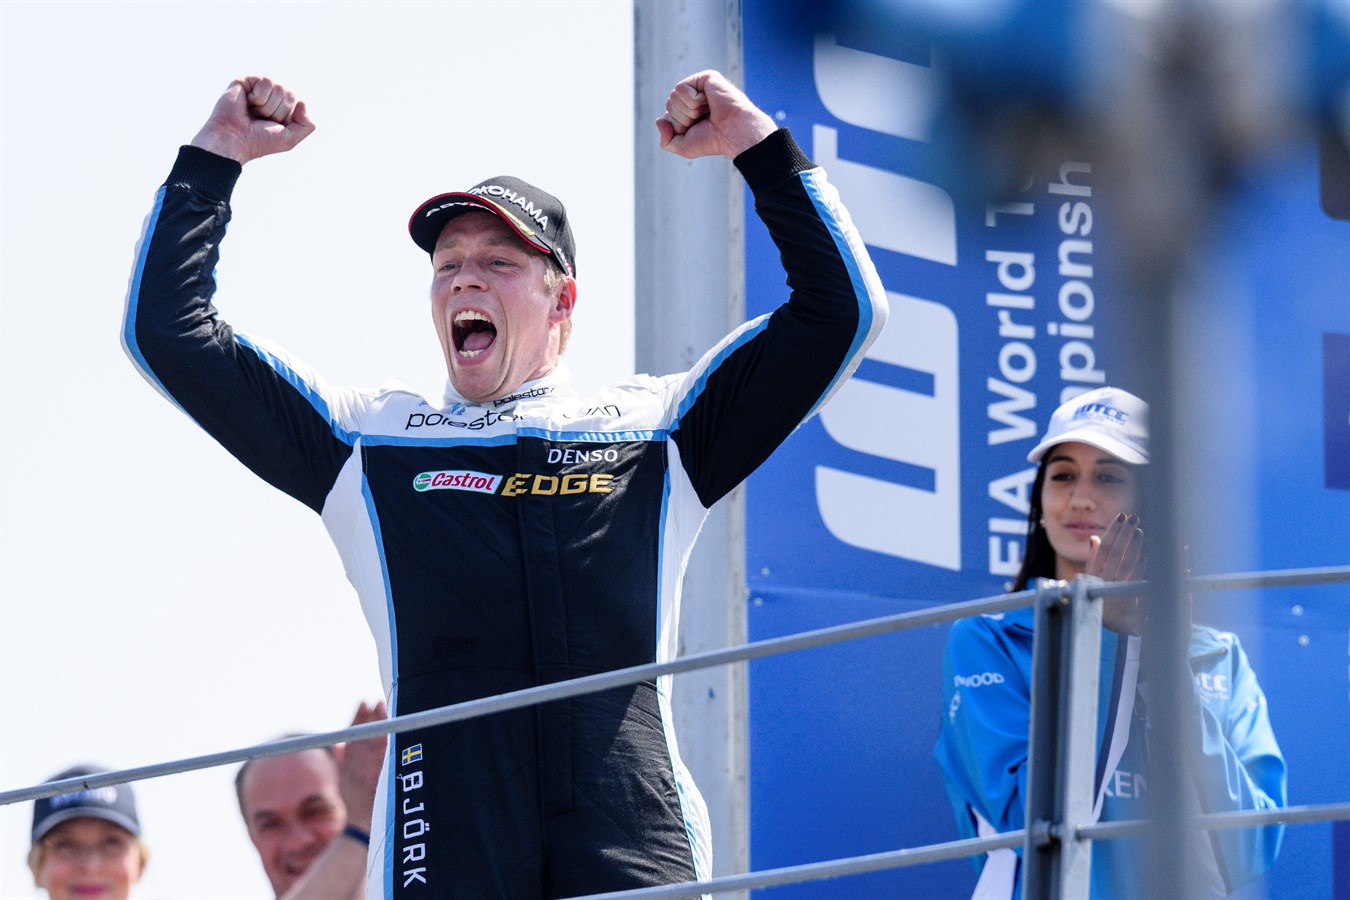 Thed Björk climbs in World Championship standings with superior victory at Monza